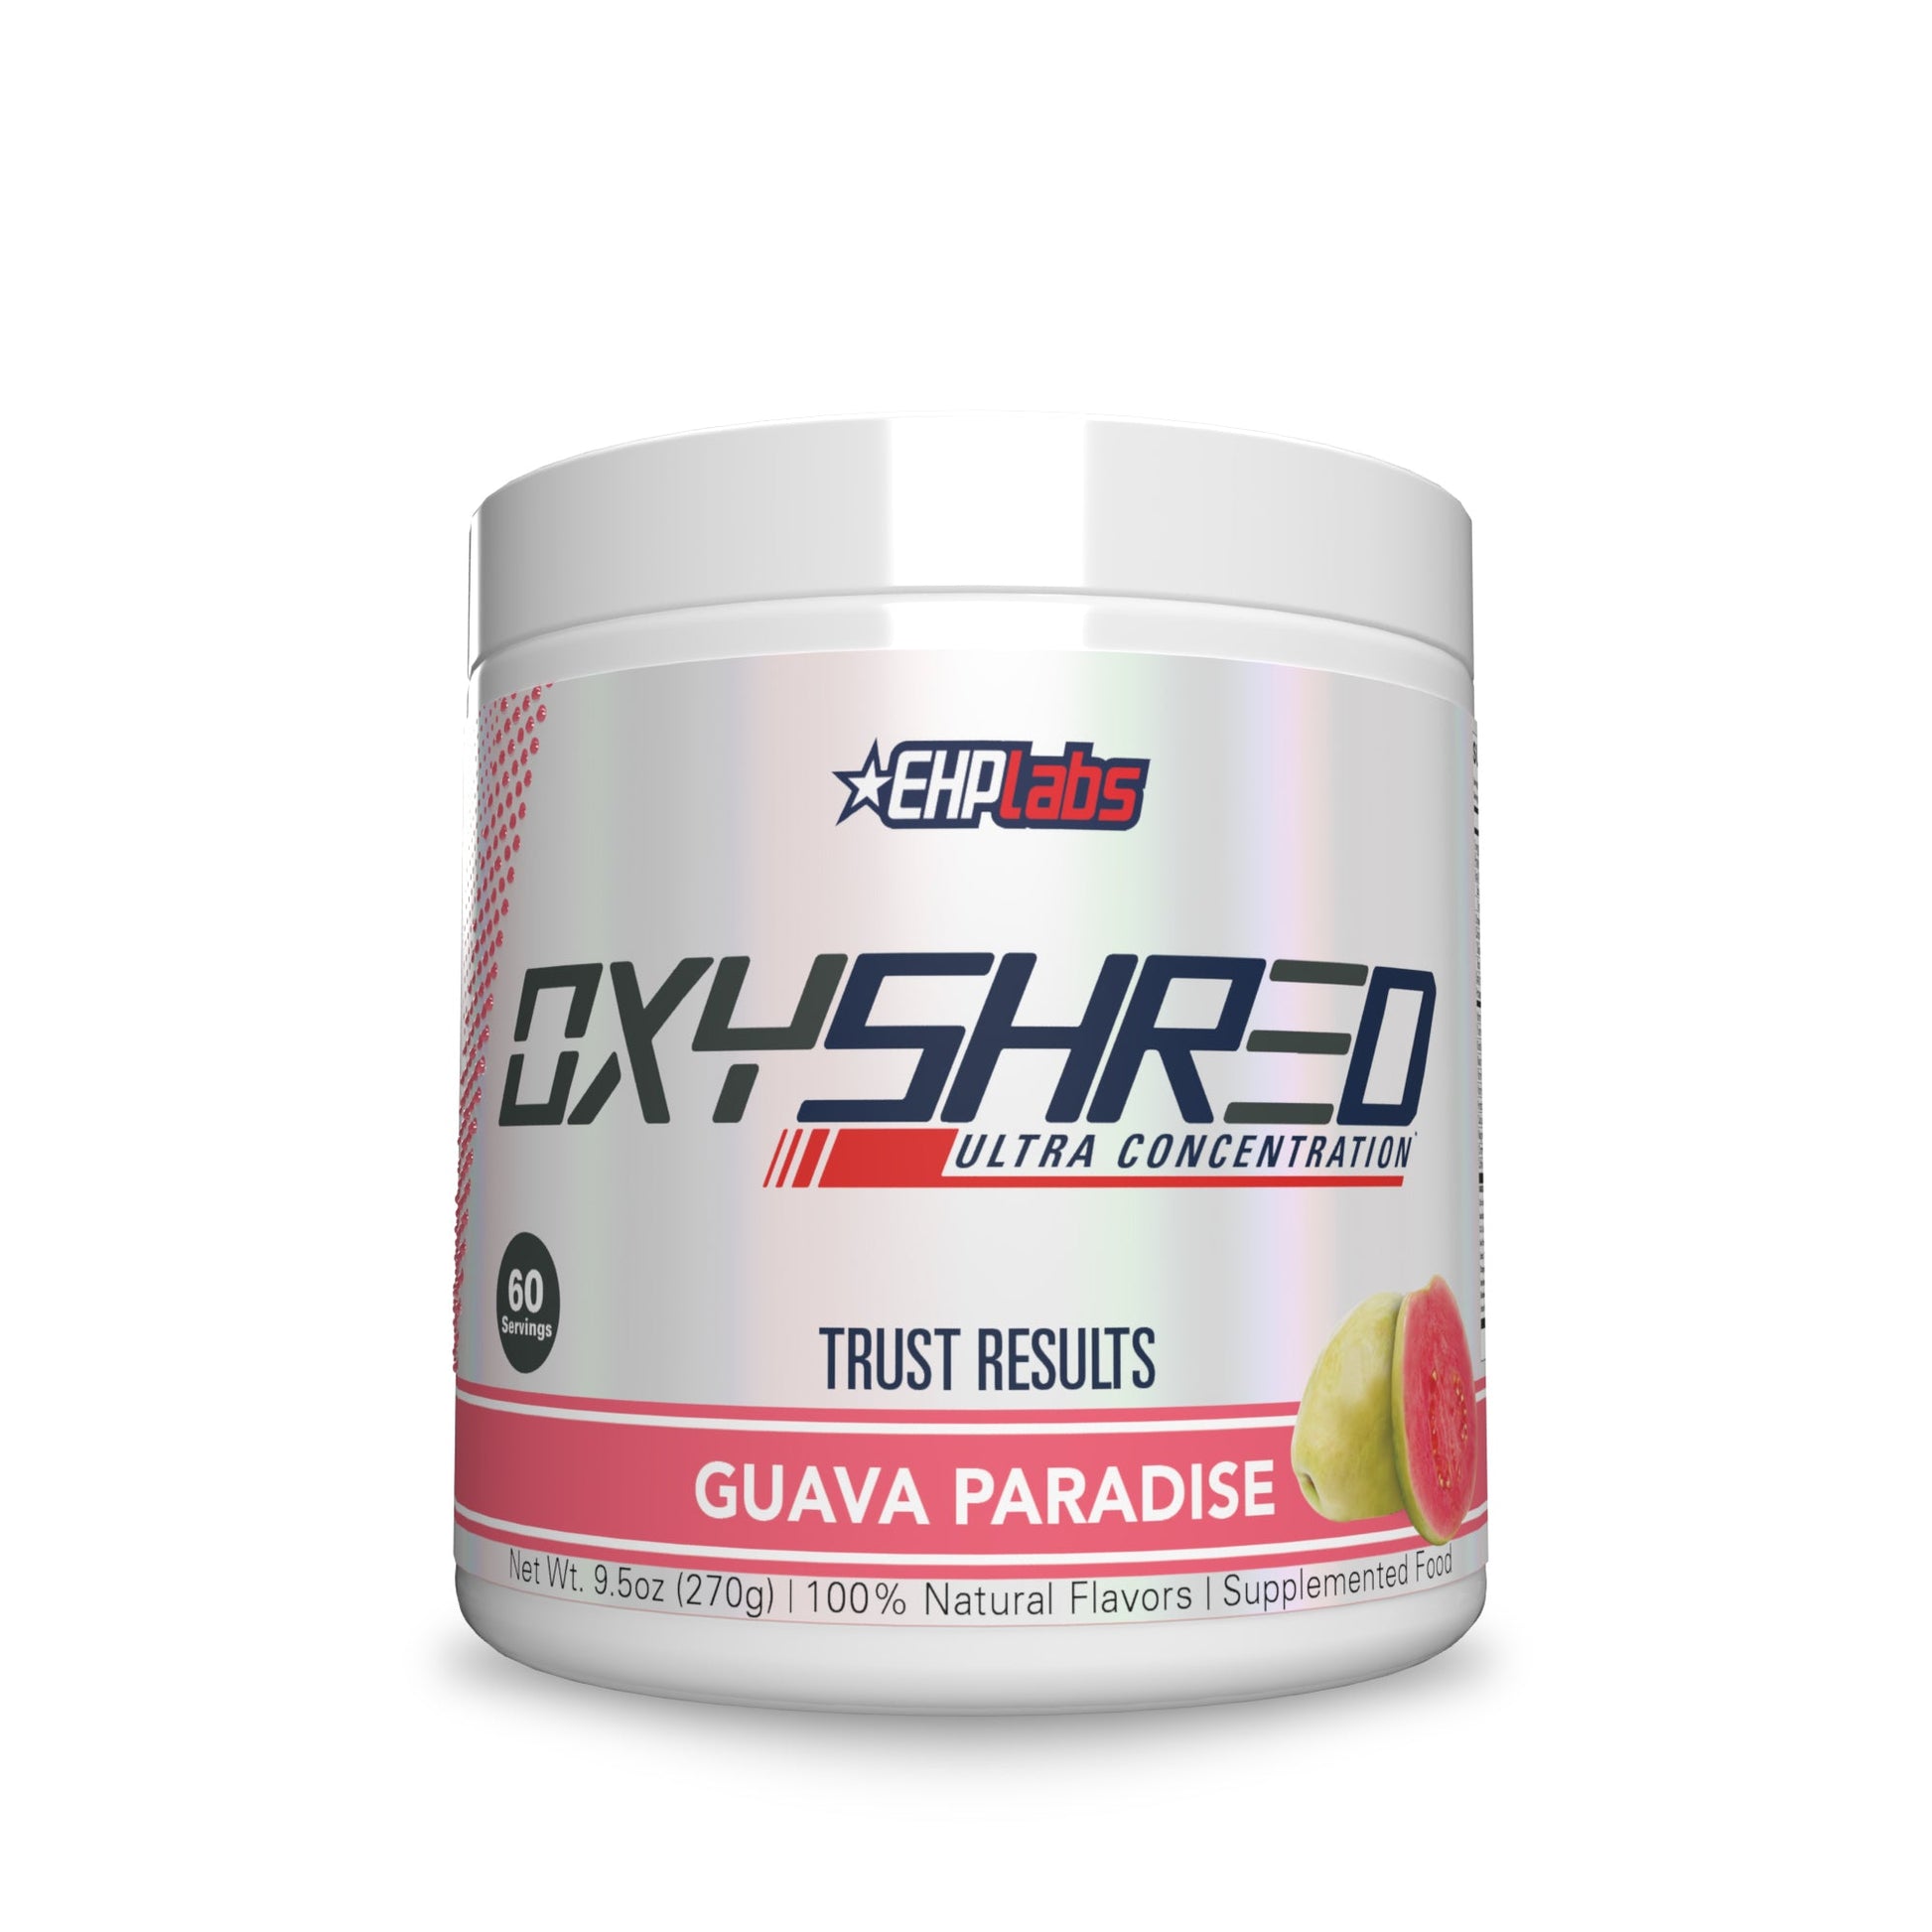 EHP Labs OxyShred Ultra Concentration 60 Serves - Supplements - Guava Paradise - The Cave Gym